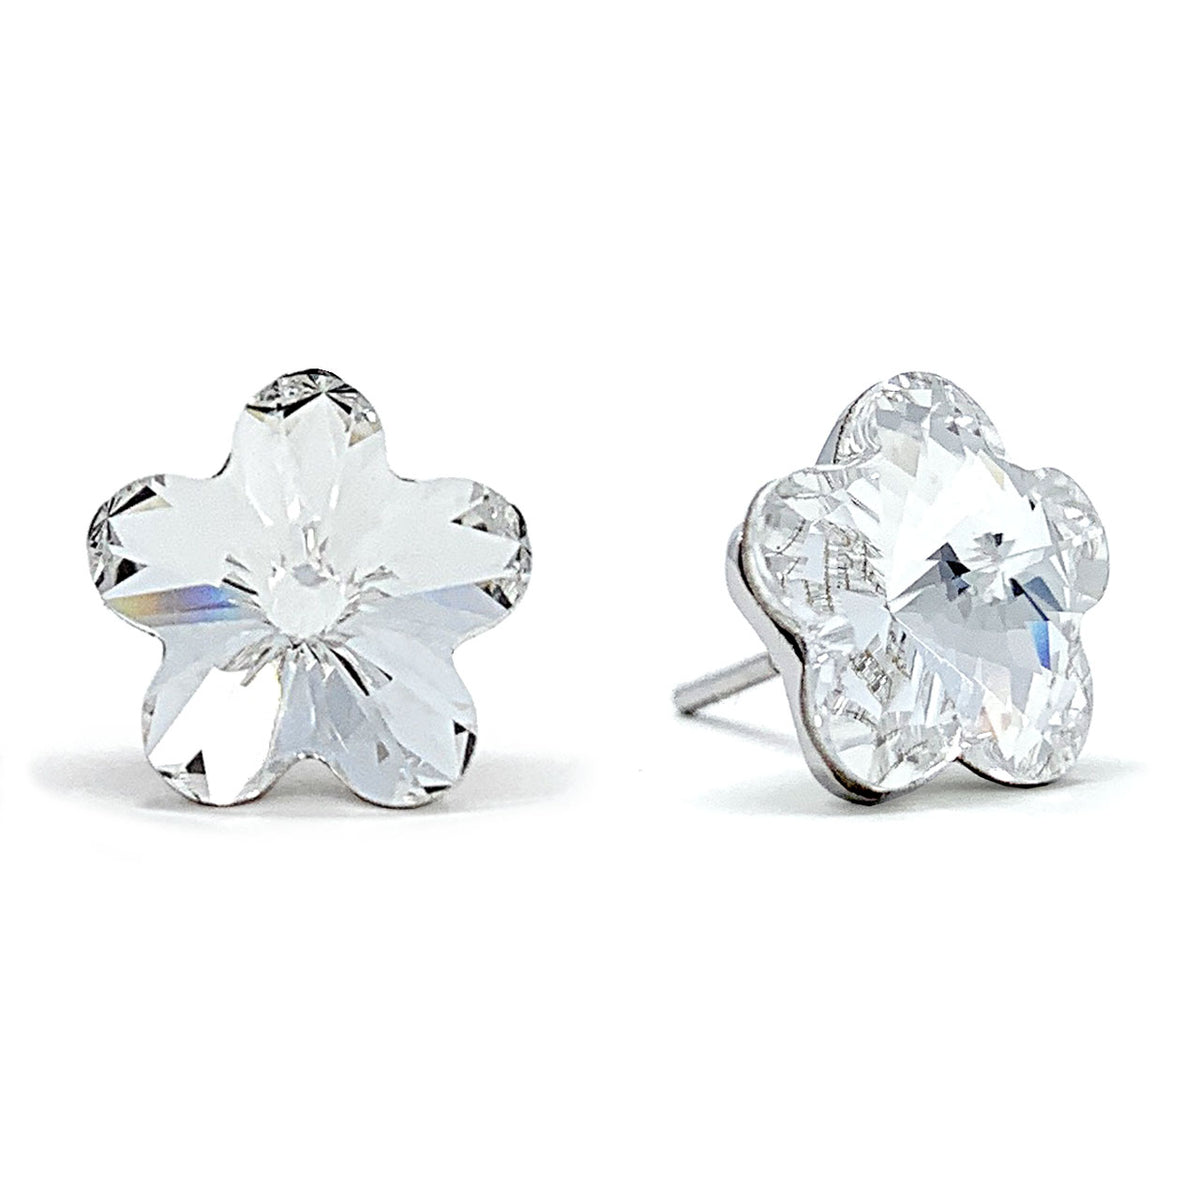 Anna Stud Earrings with White Clear Flower Crystals from Swarovski Silver Toned Rhodium Plated - Ed Heart